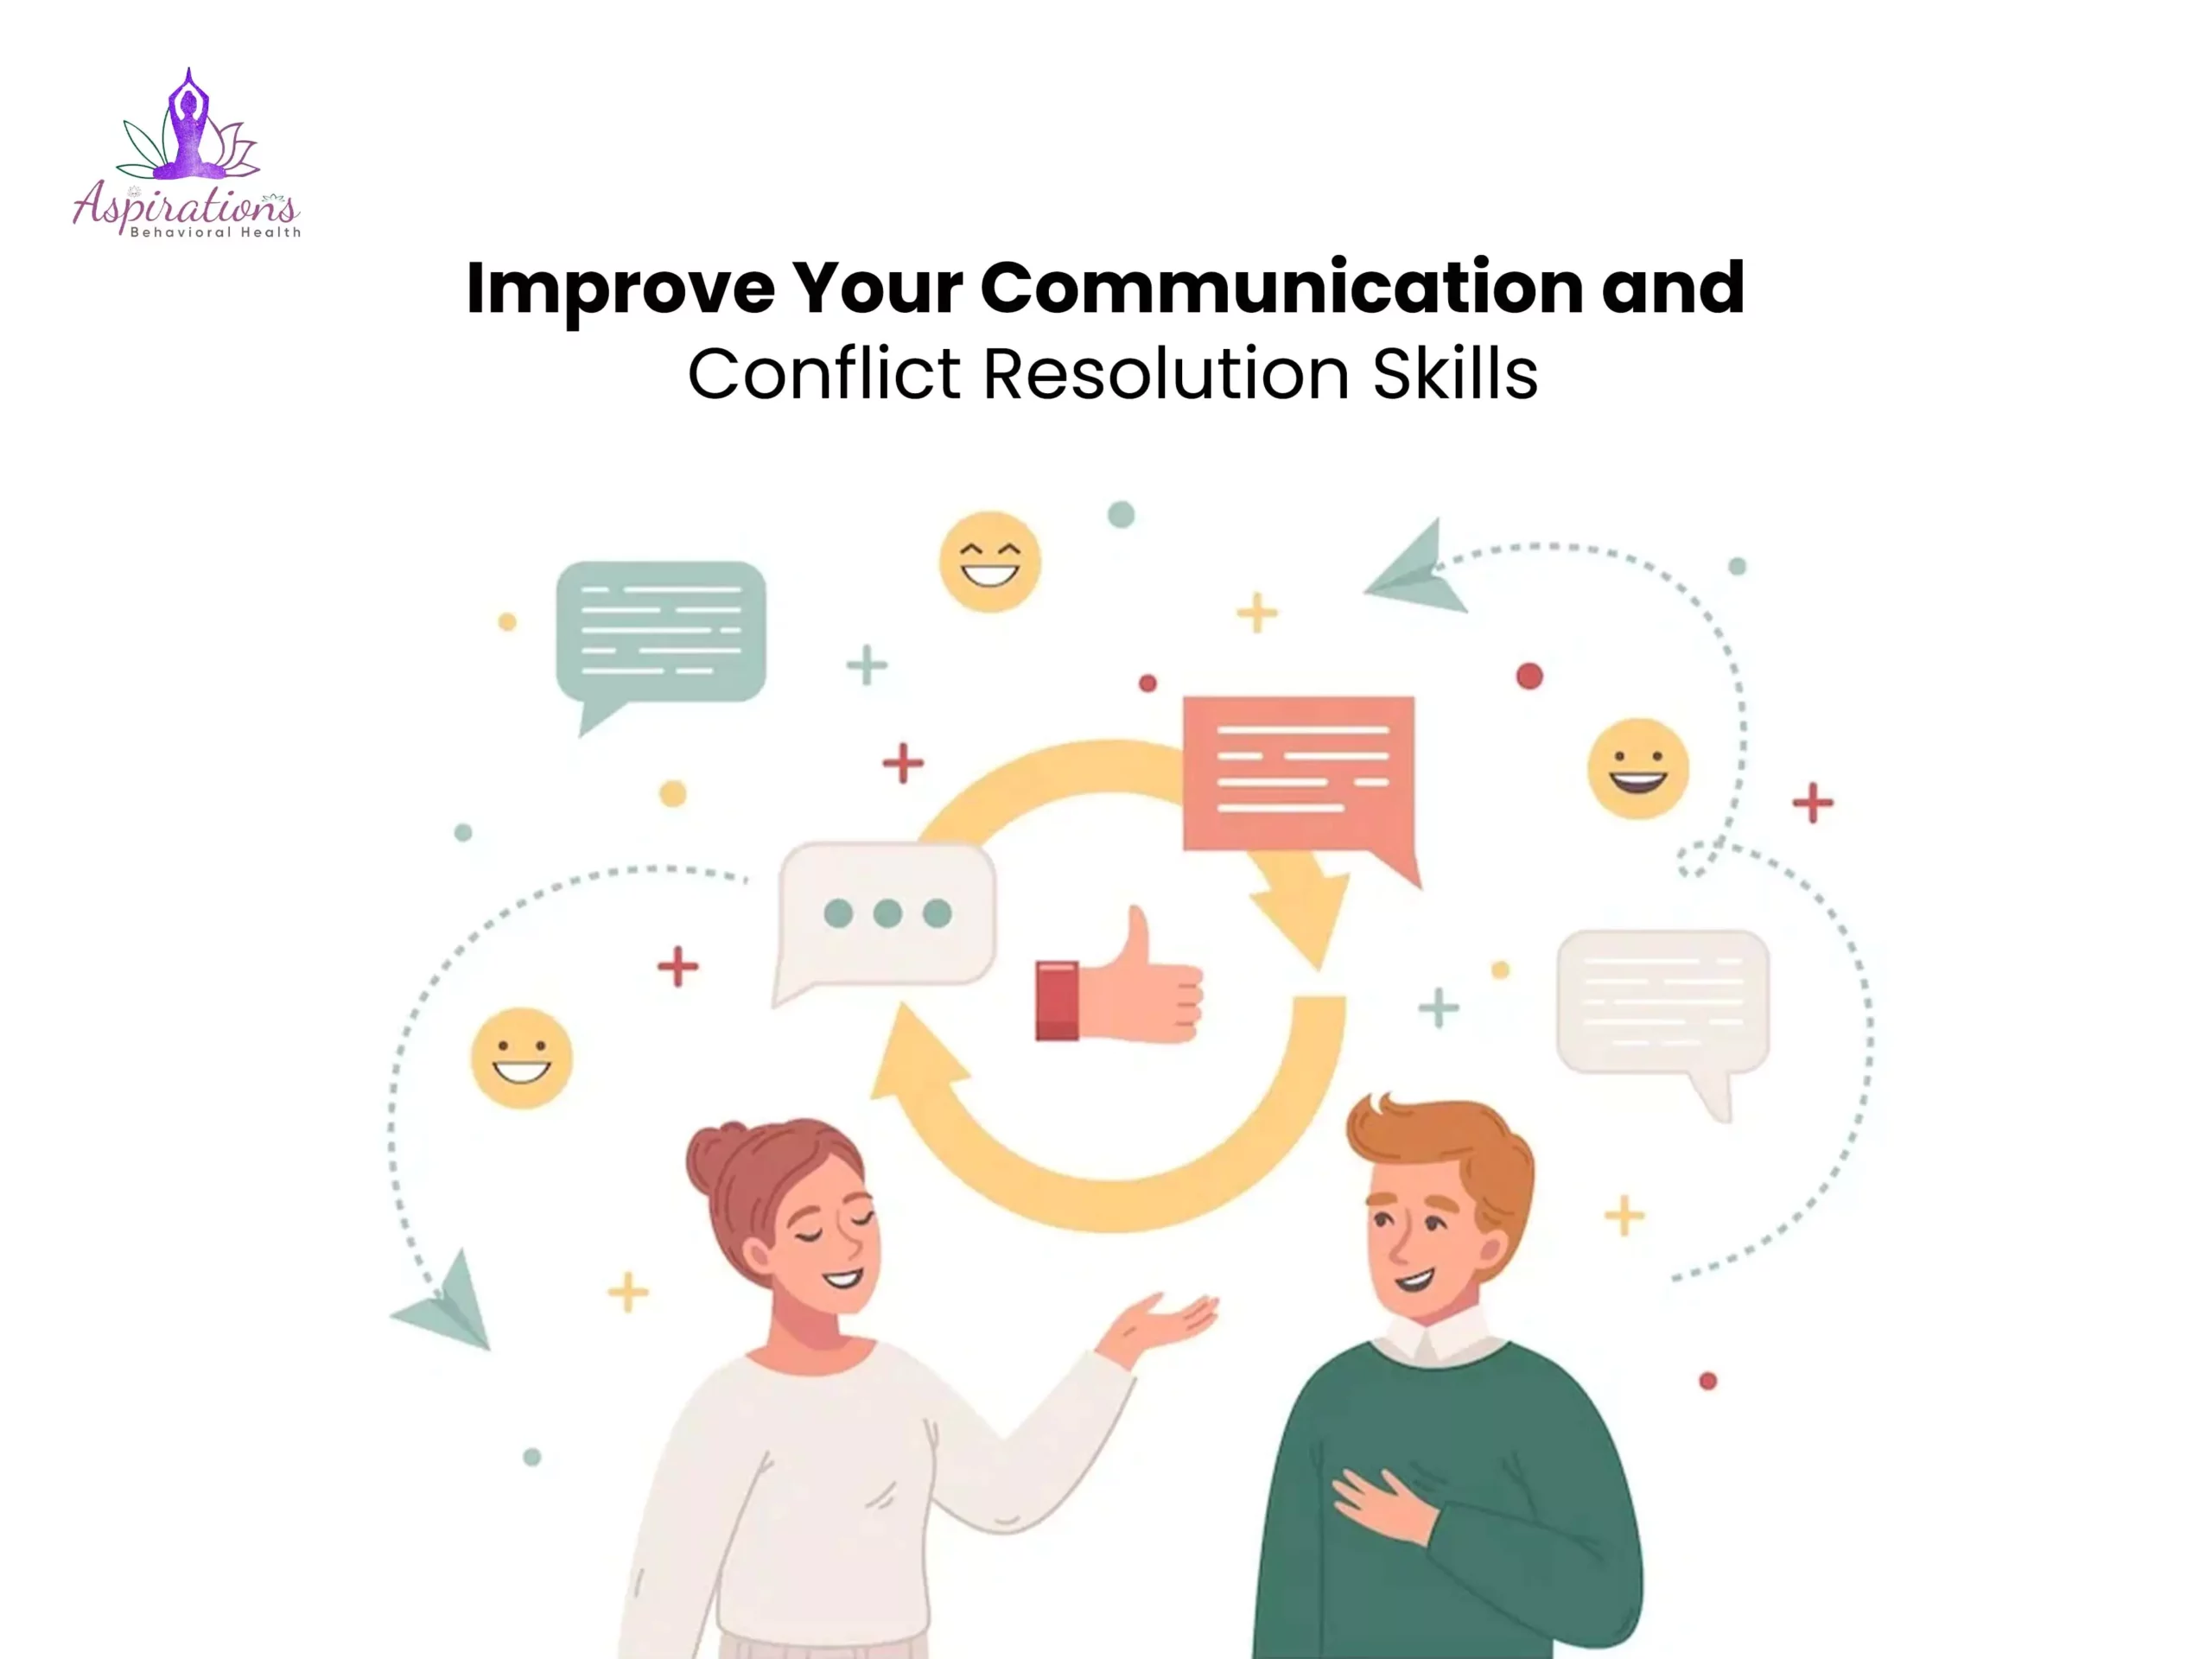 Improve Your Communication and Conflict Resolution Skills